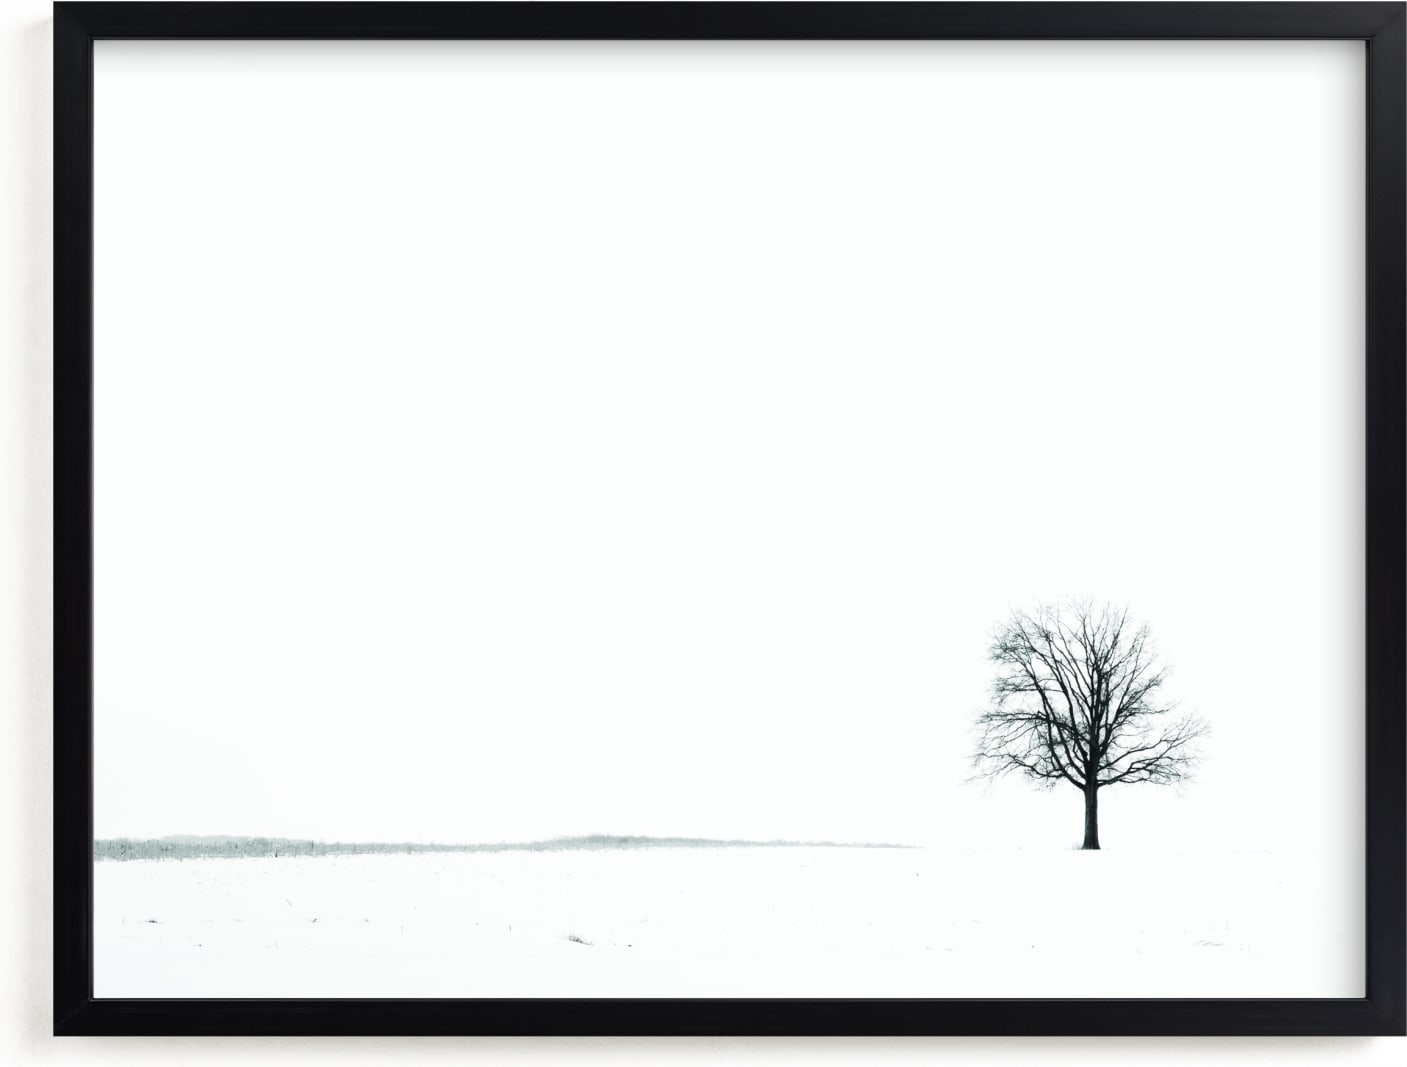 This is a black and white art by Robin Ott called Winter Tree.